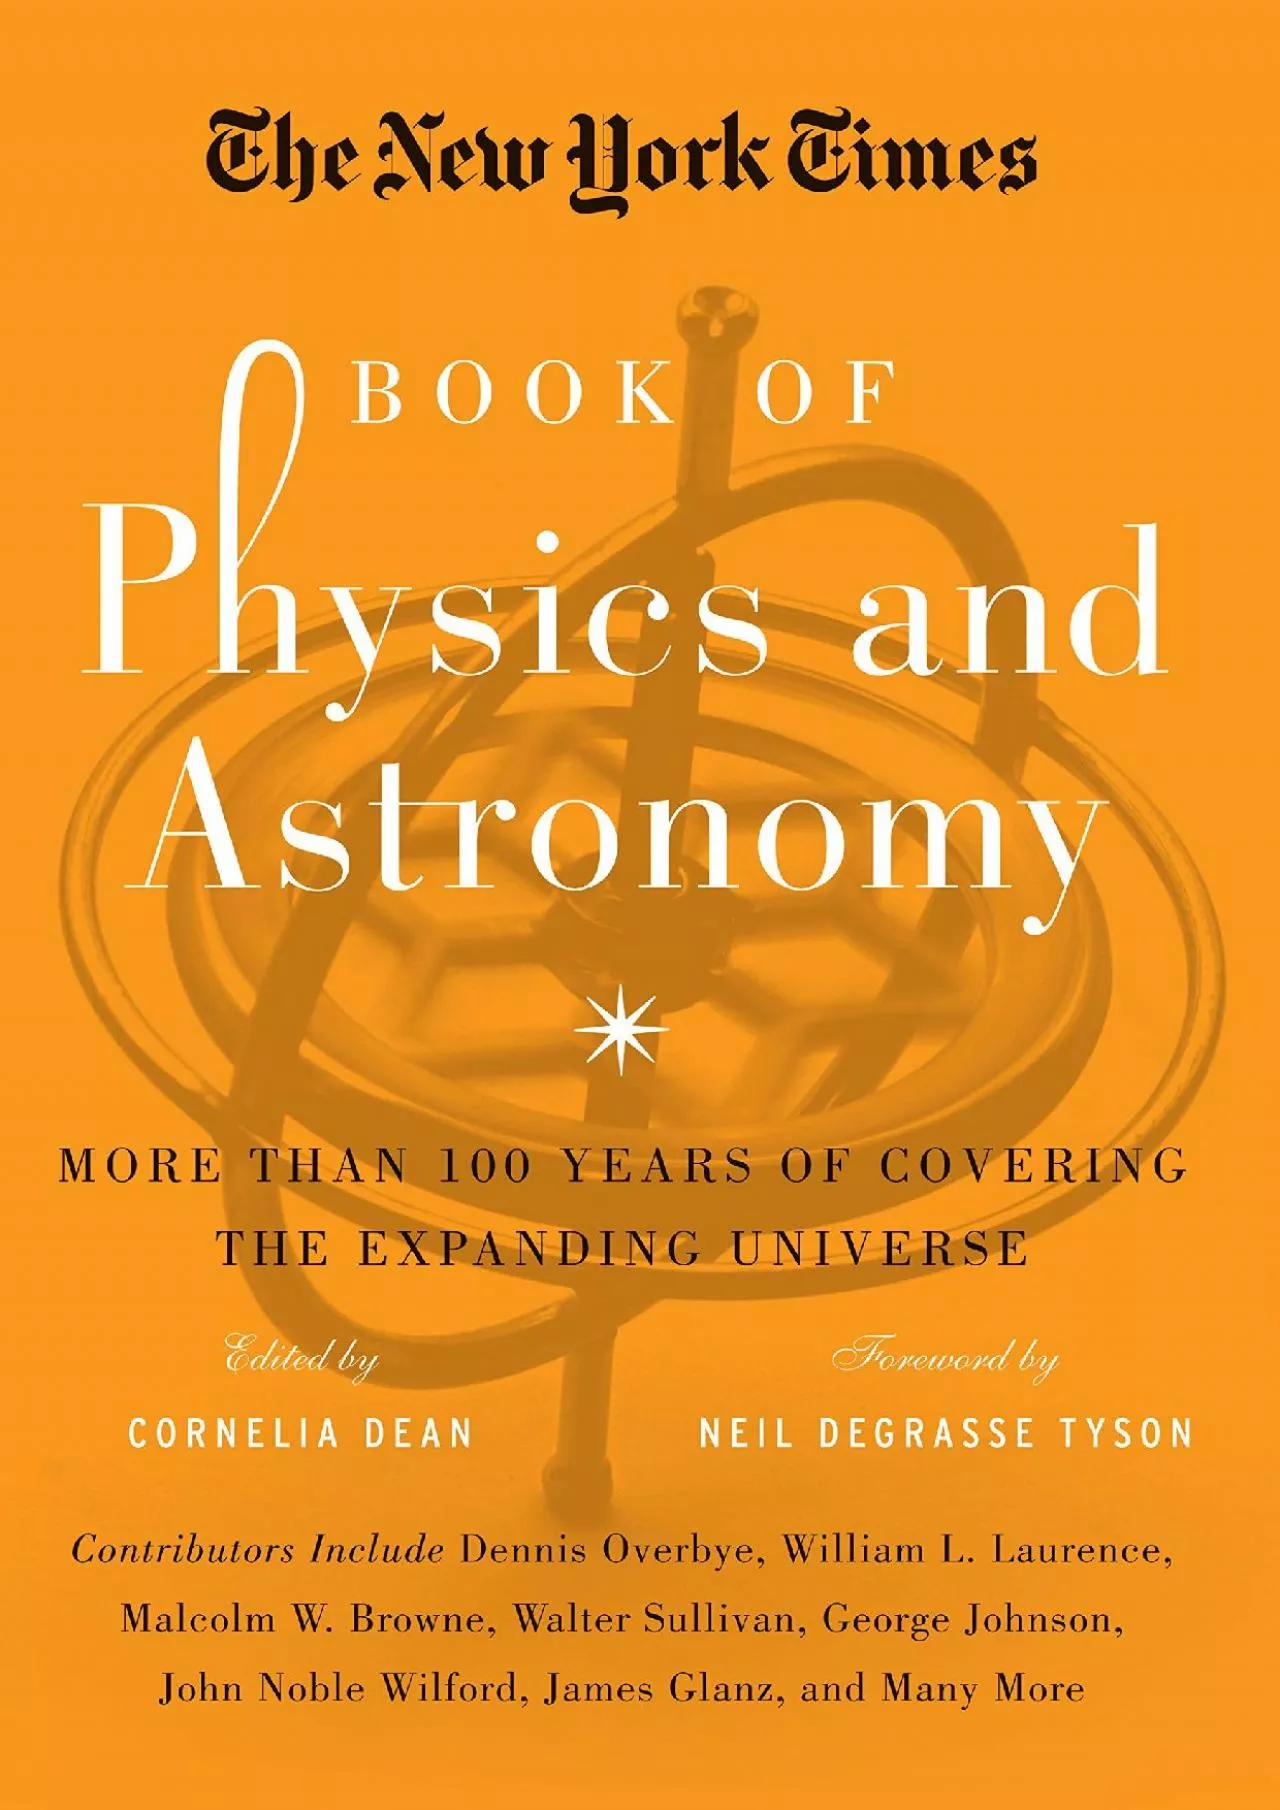 (DOWNLOAD)-The New York Times Book of Physics and Astronomy: More Than 100 Years of Covering